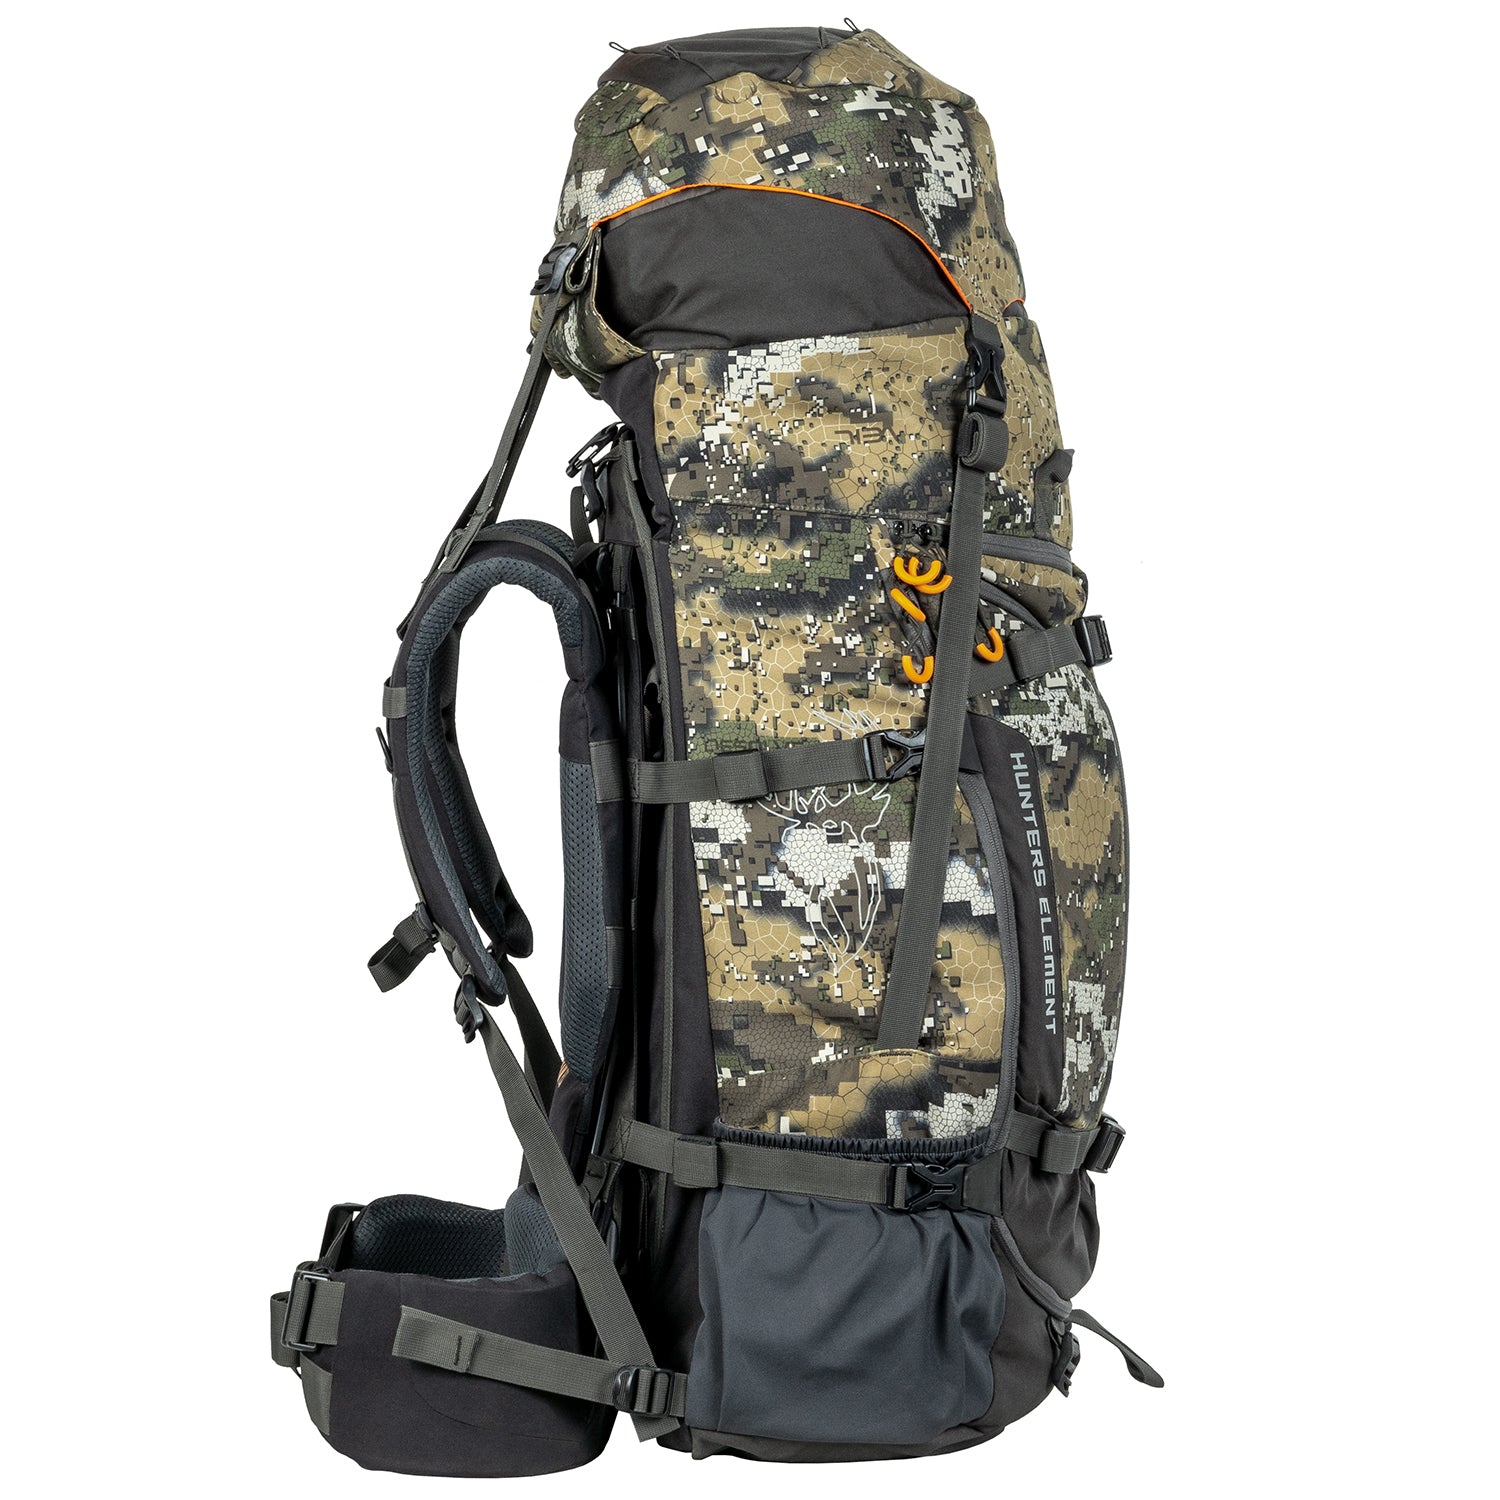 Arete Bag 75L, Fits Up To 75 Litres